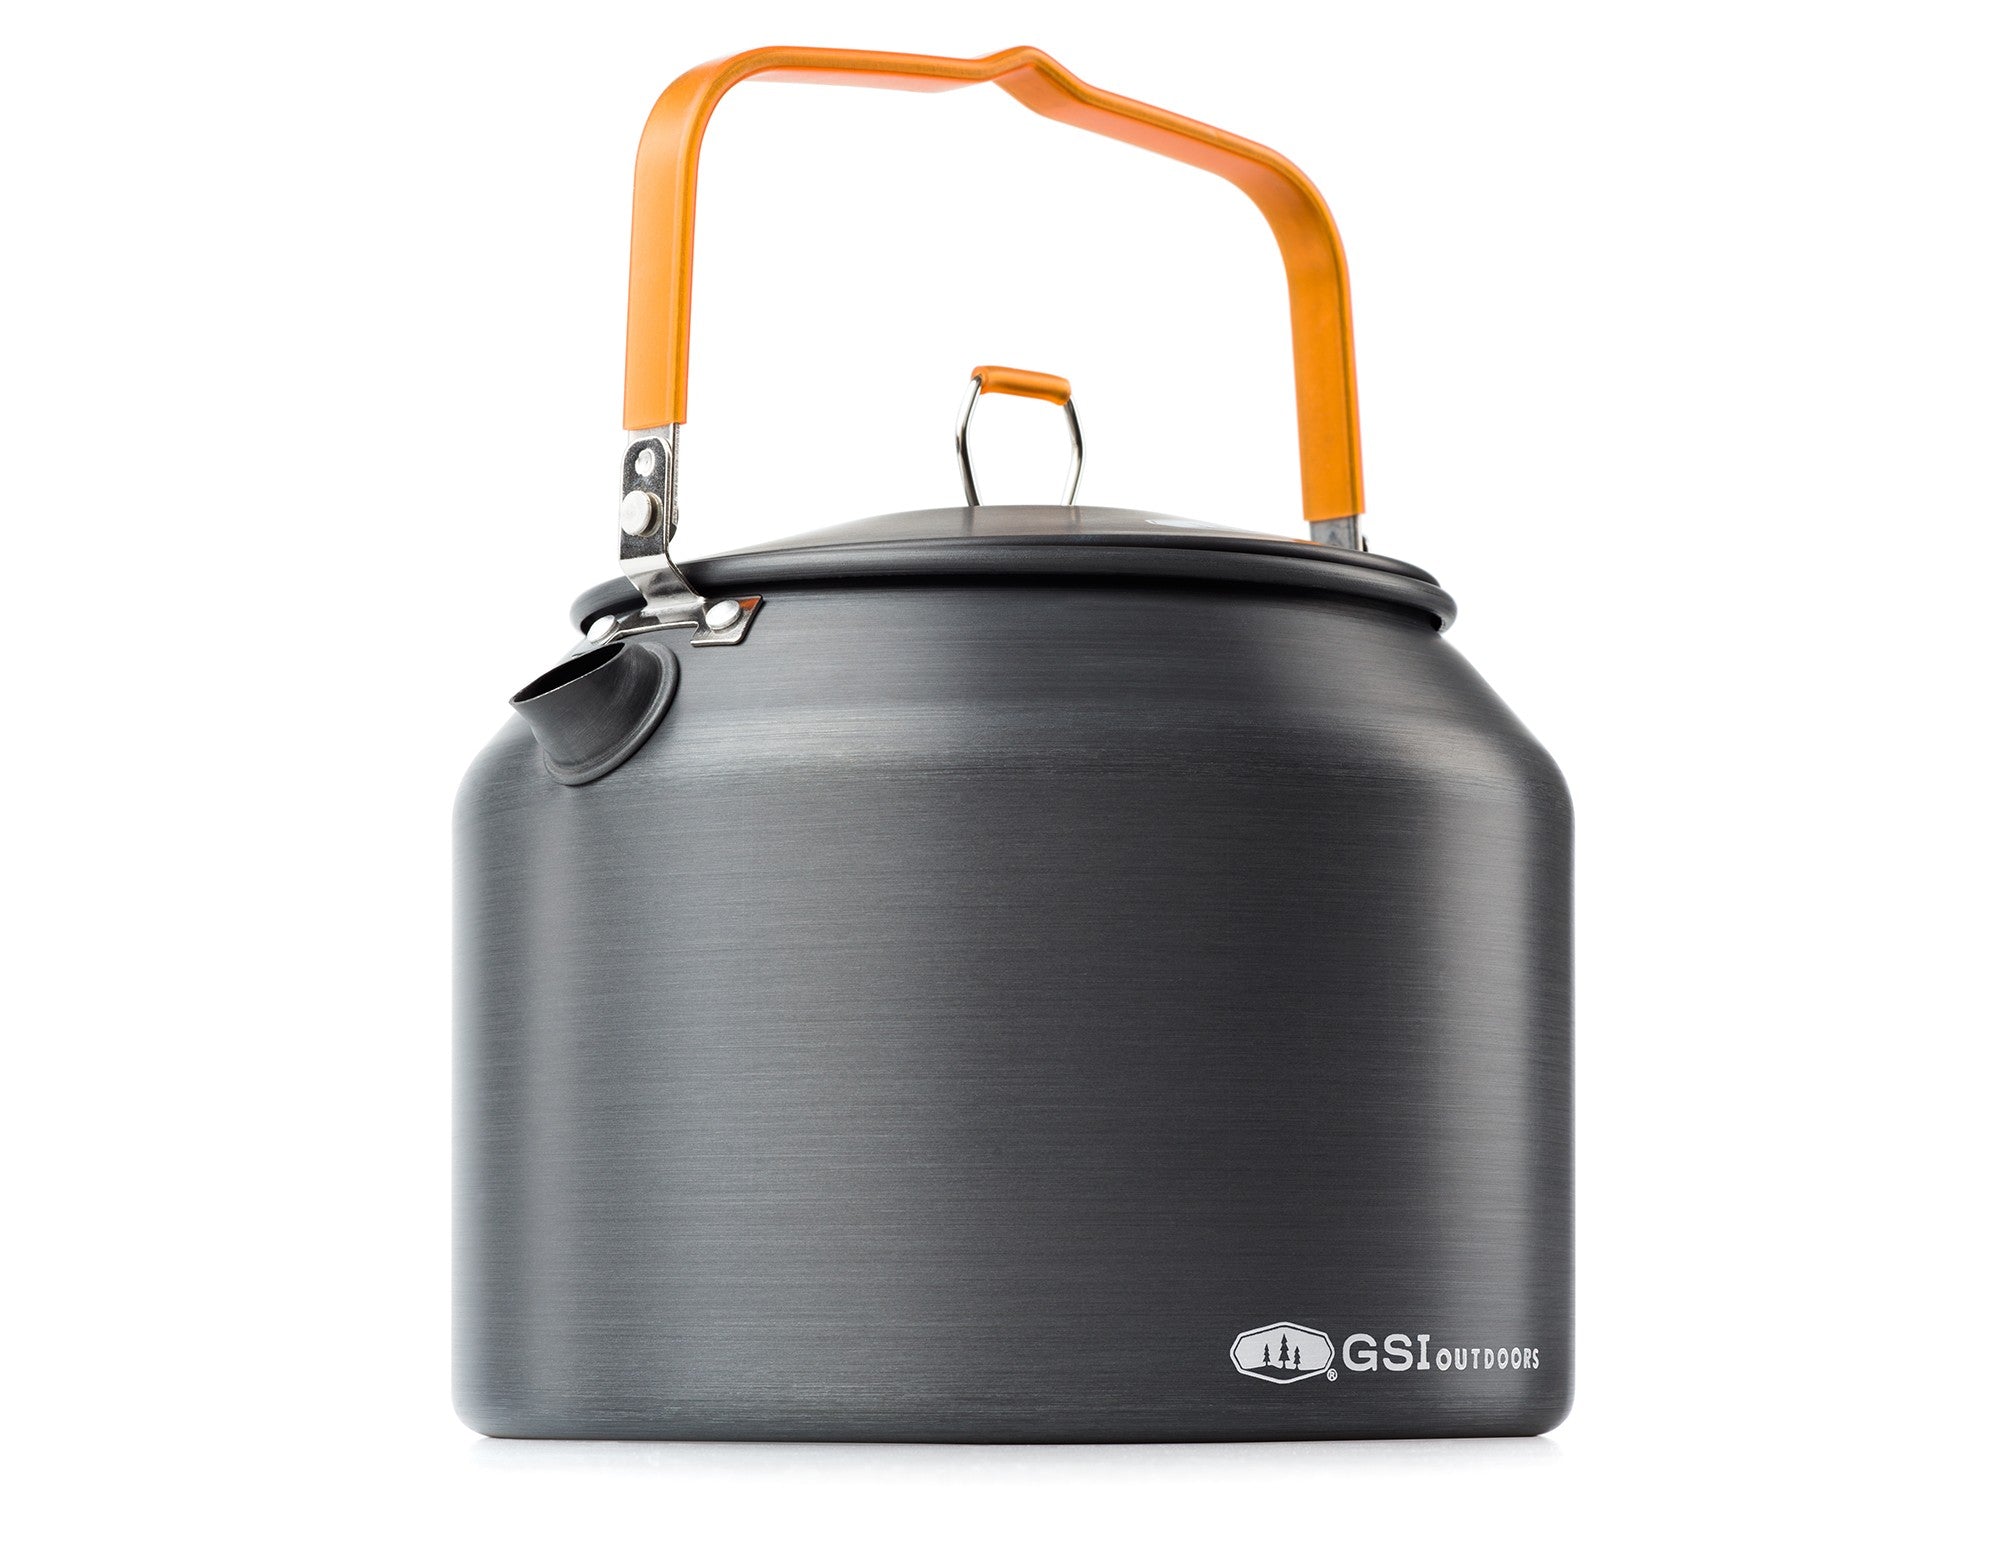 Glacier Stainless 1 Liter Tea Kettle, Camping Cookware